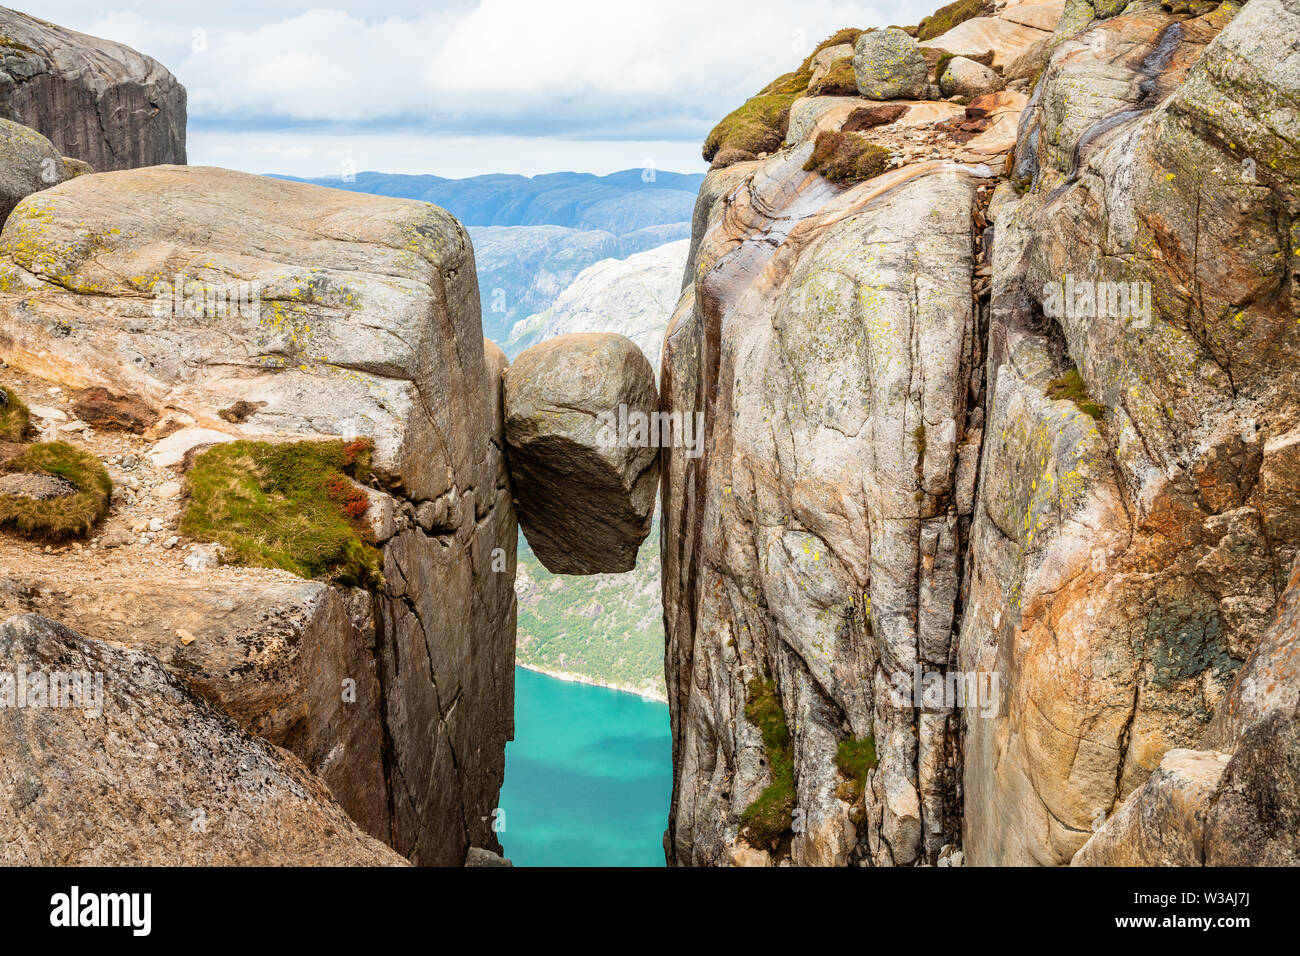 Kjeragbolten, the stone stuck between two rocks with fjord in the background, Lysefjord, Norway Stock Photo